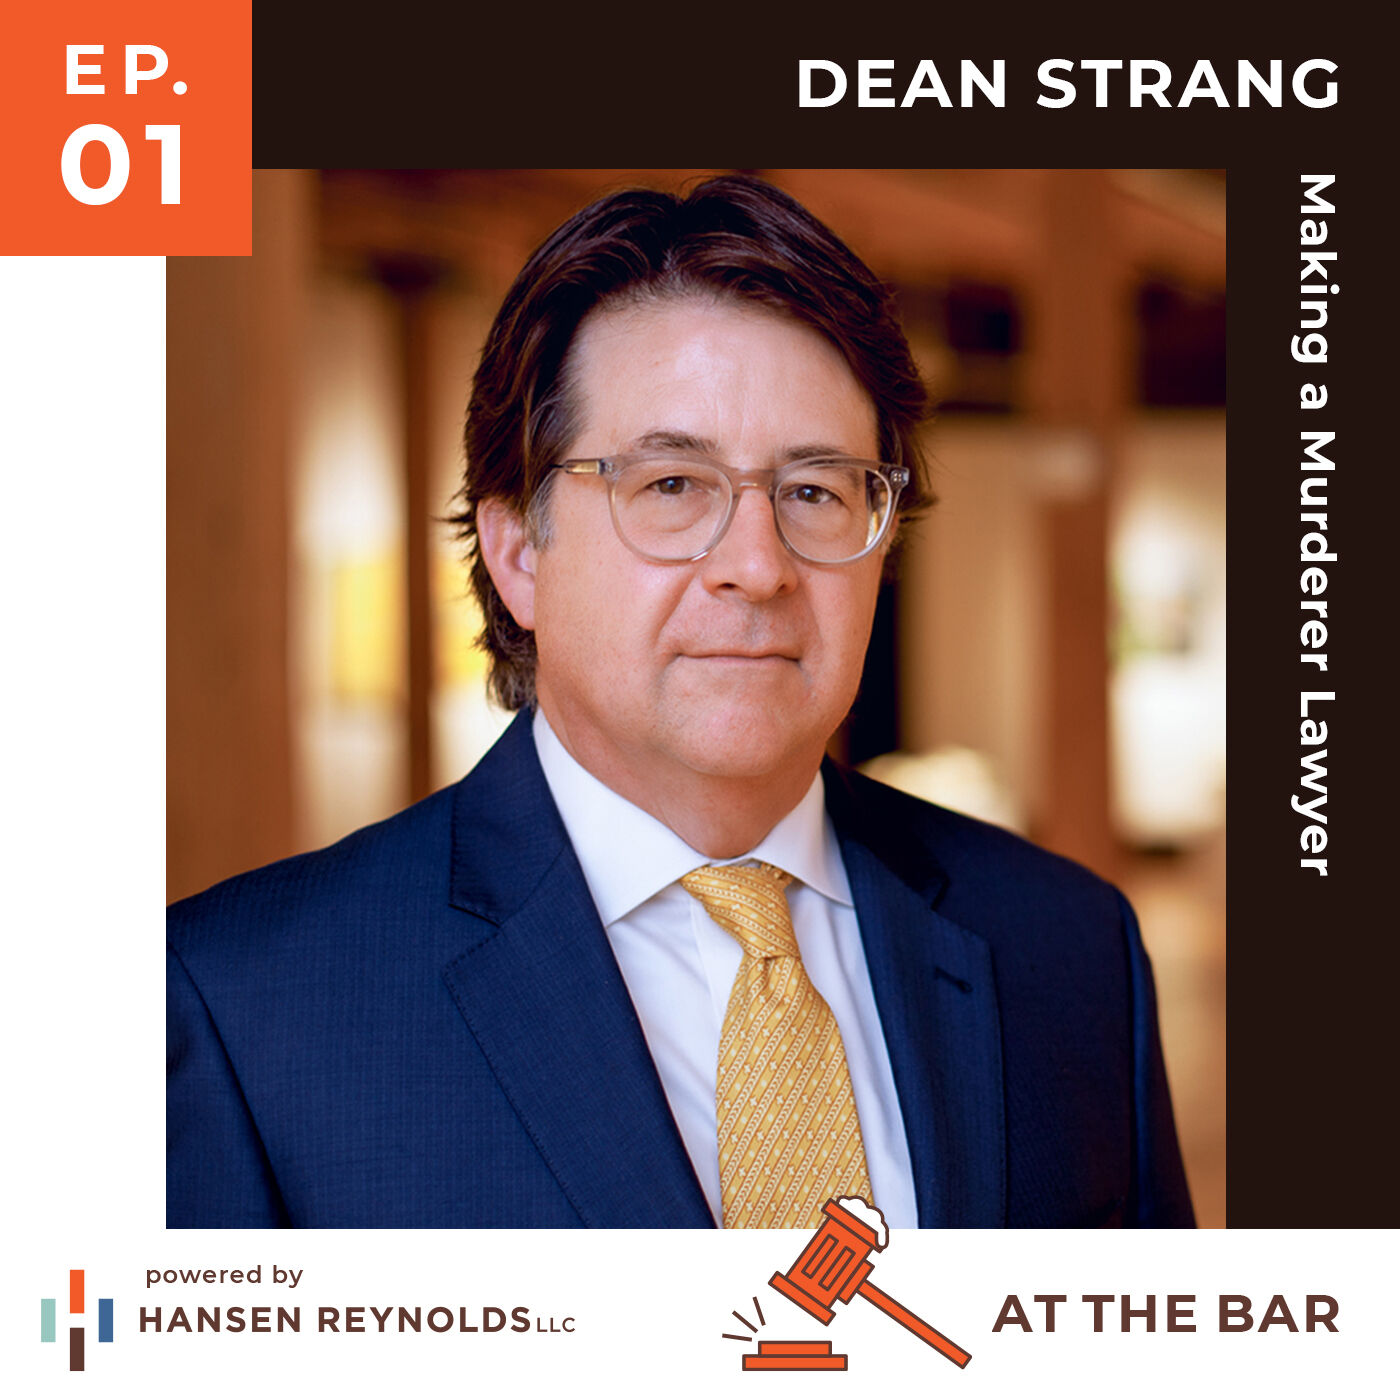 At the Bar episode one cover with Dean Strang